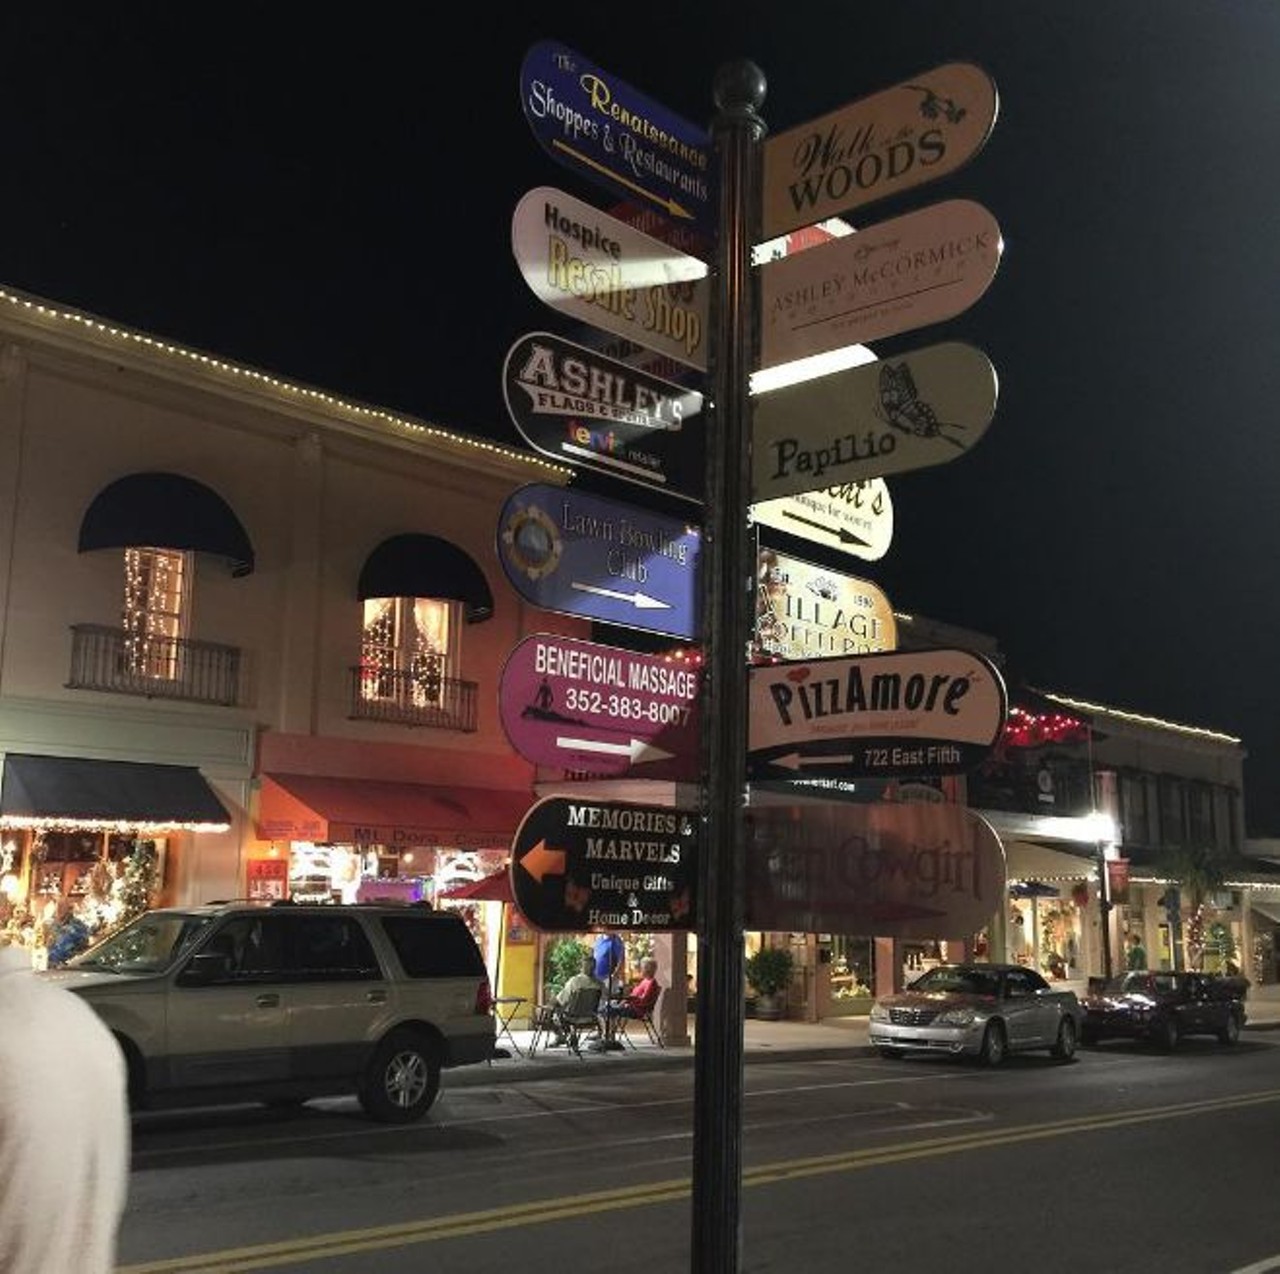 Mount Dora
District to explore: Donnelly Street
A trip to Donnelly Street can provide the best of something old and something new. Donnelly boasts an impressive antiquing scene. Snag some treasures from the past and afterwards stop by celebrity chef Norman Van Aken's restaurant, 1921, for some modern Florida cuisine only a street away.
Photo via adh985/Instagram